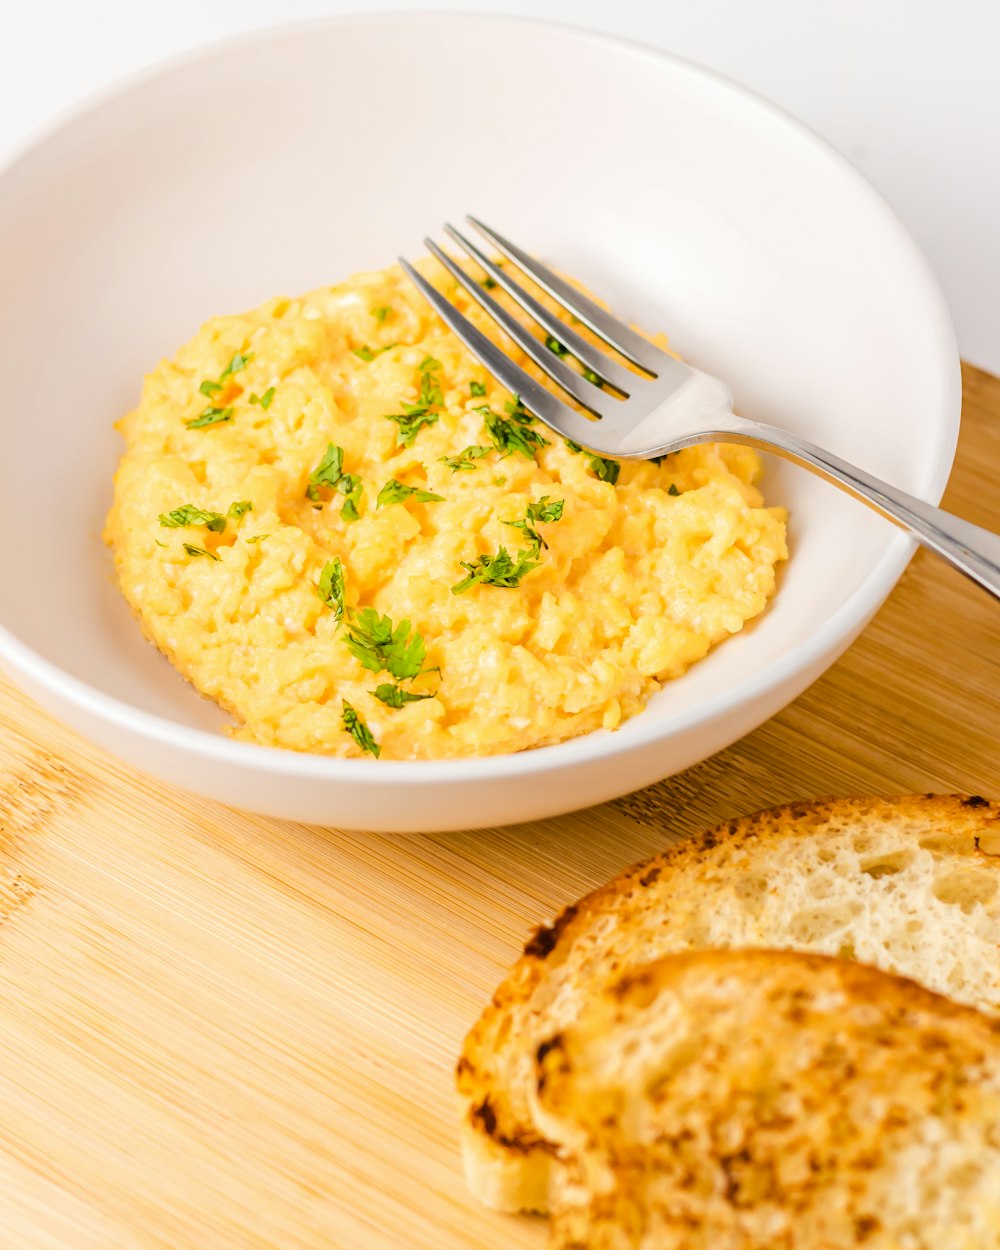 a bowl of scrambled eggs next to a slice of bread